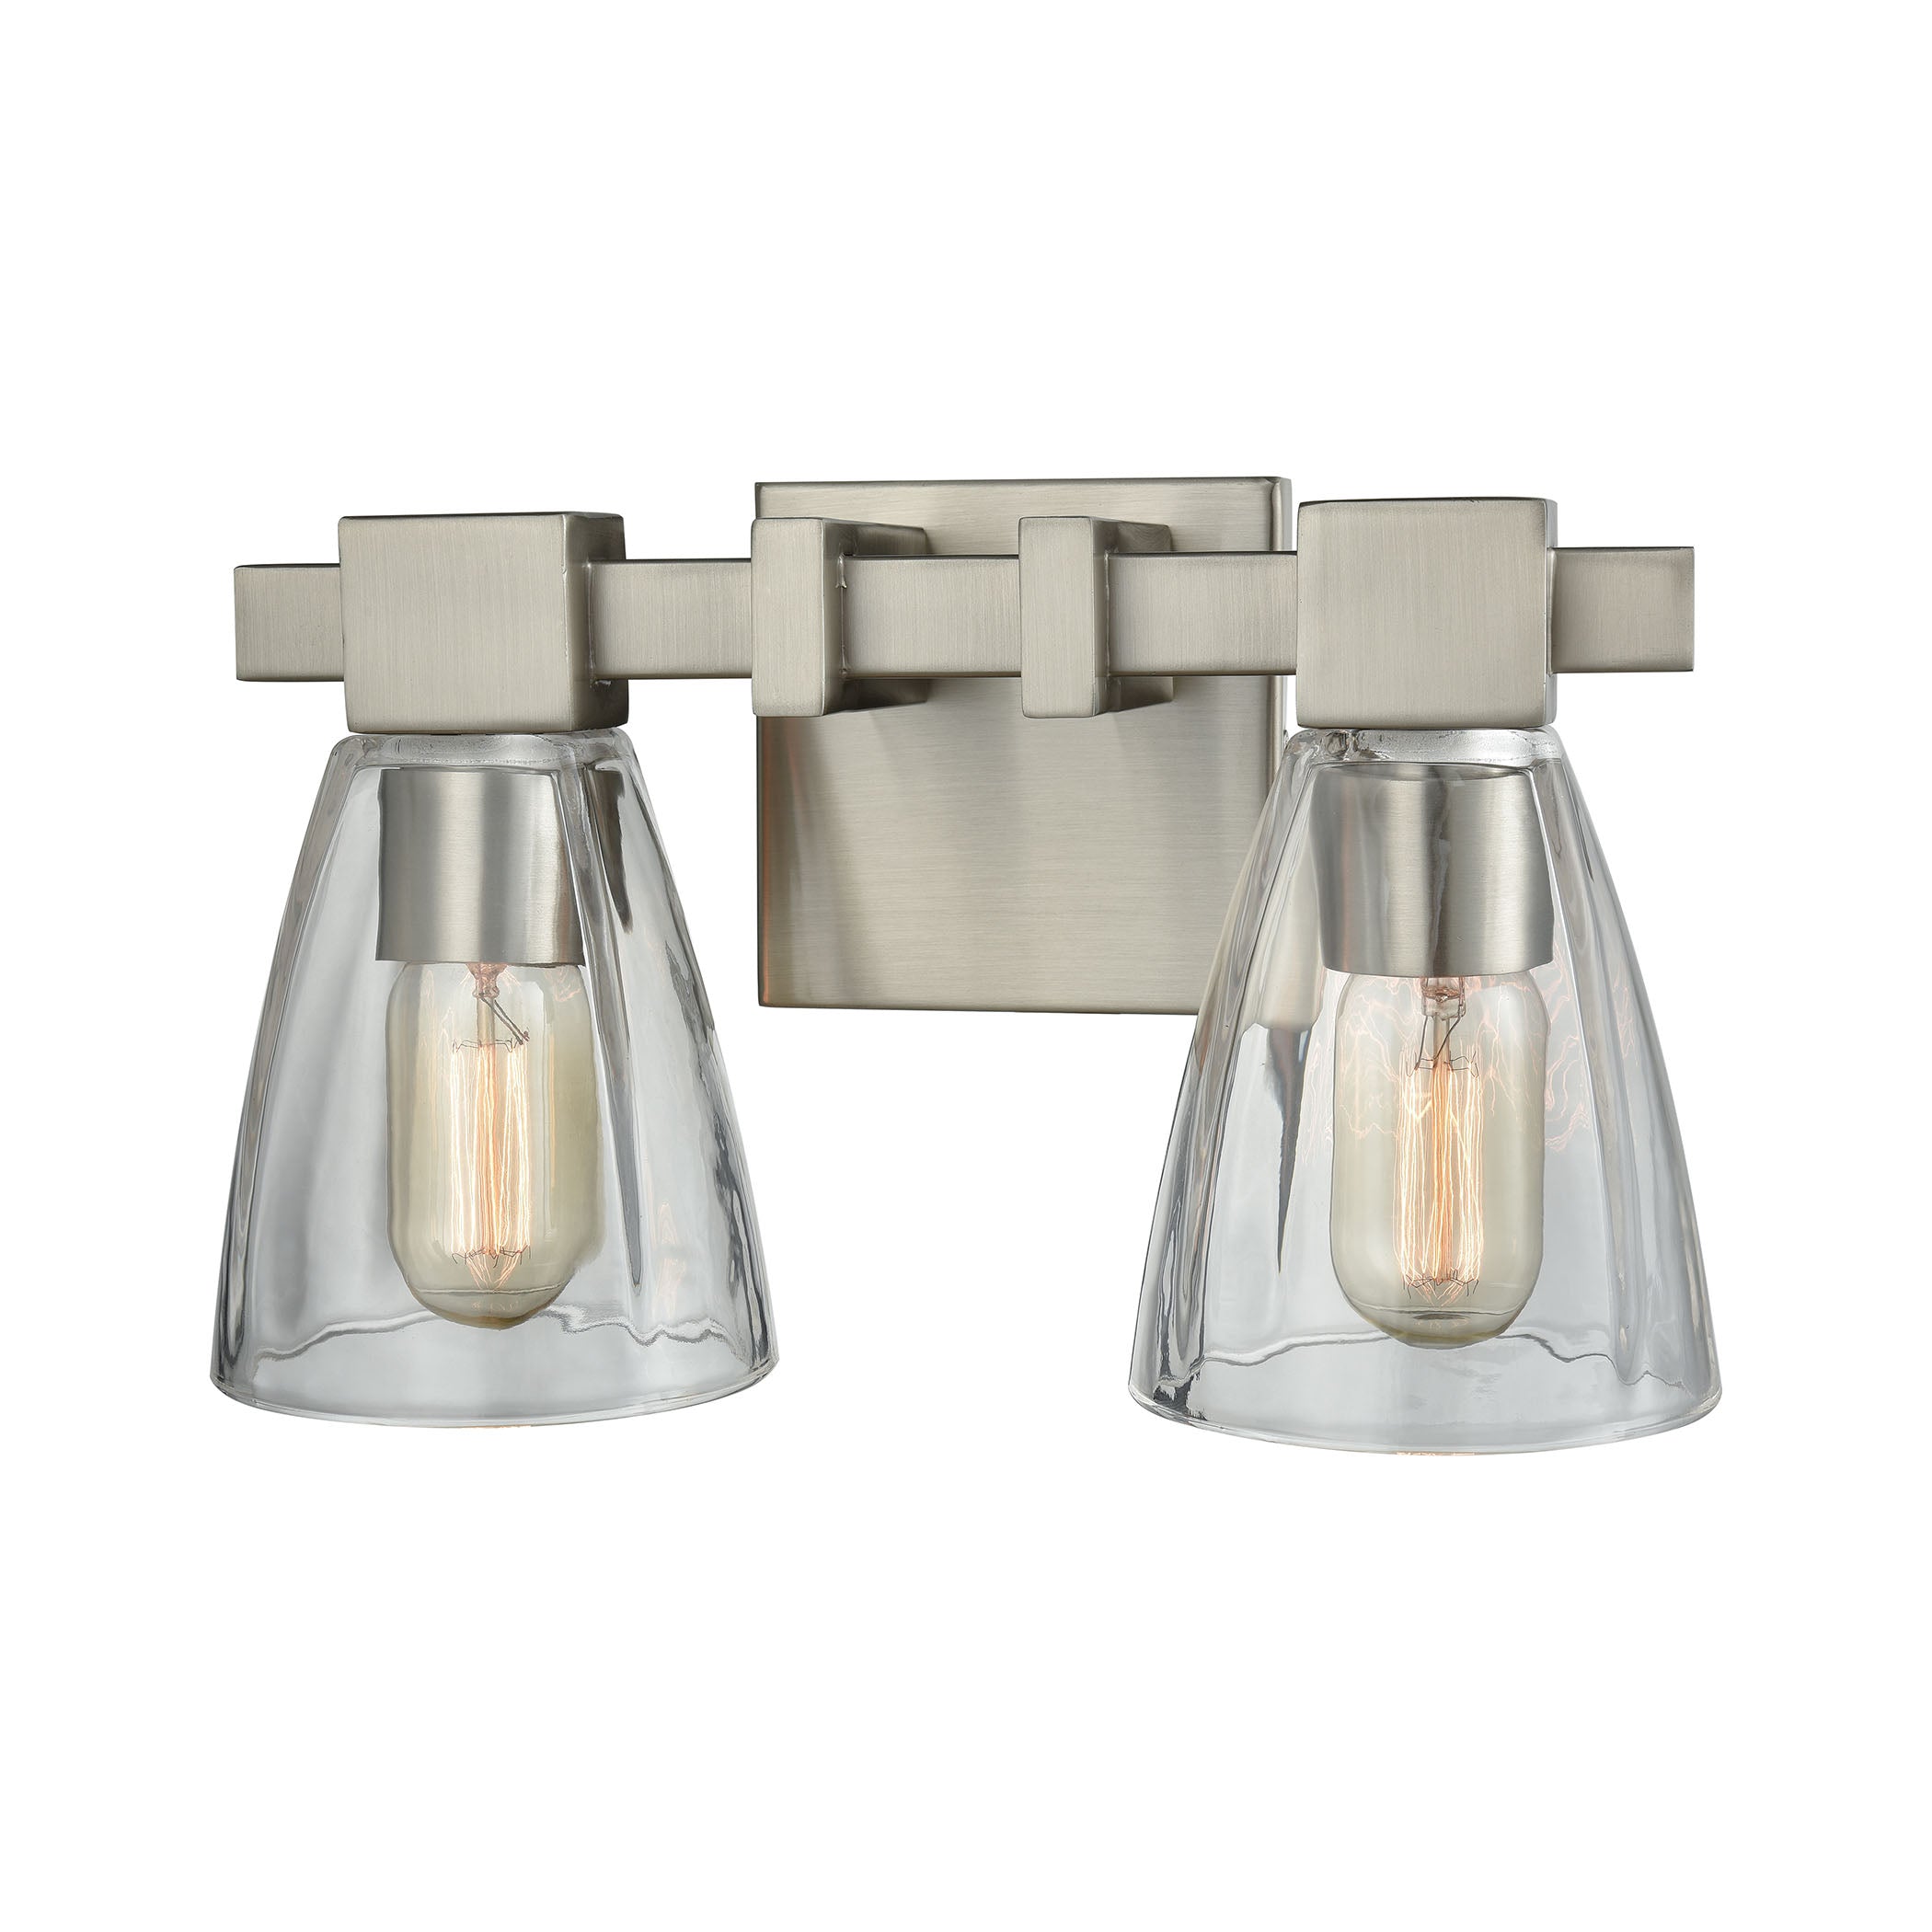 ELK Lighting 11981/2 Ensley 2-Light Vanity Lamp in Satin Nickel with Square-to-Round Clear Glass